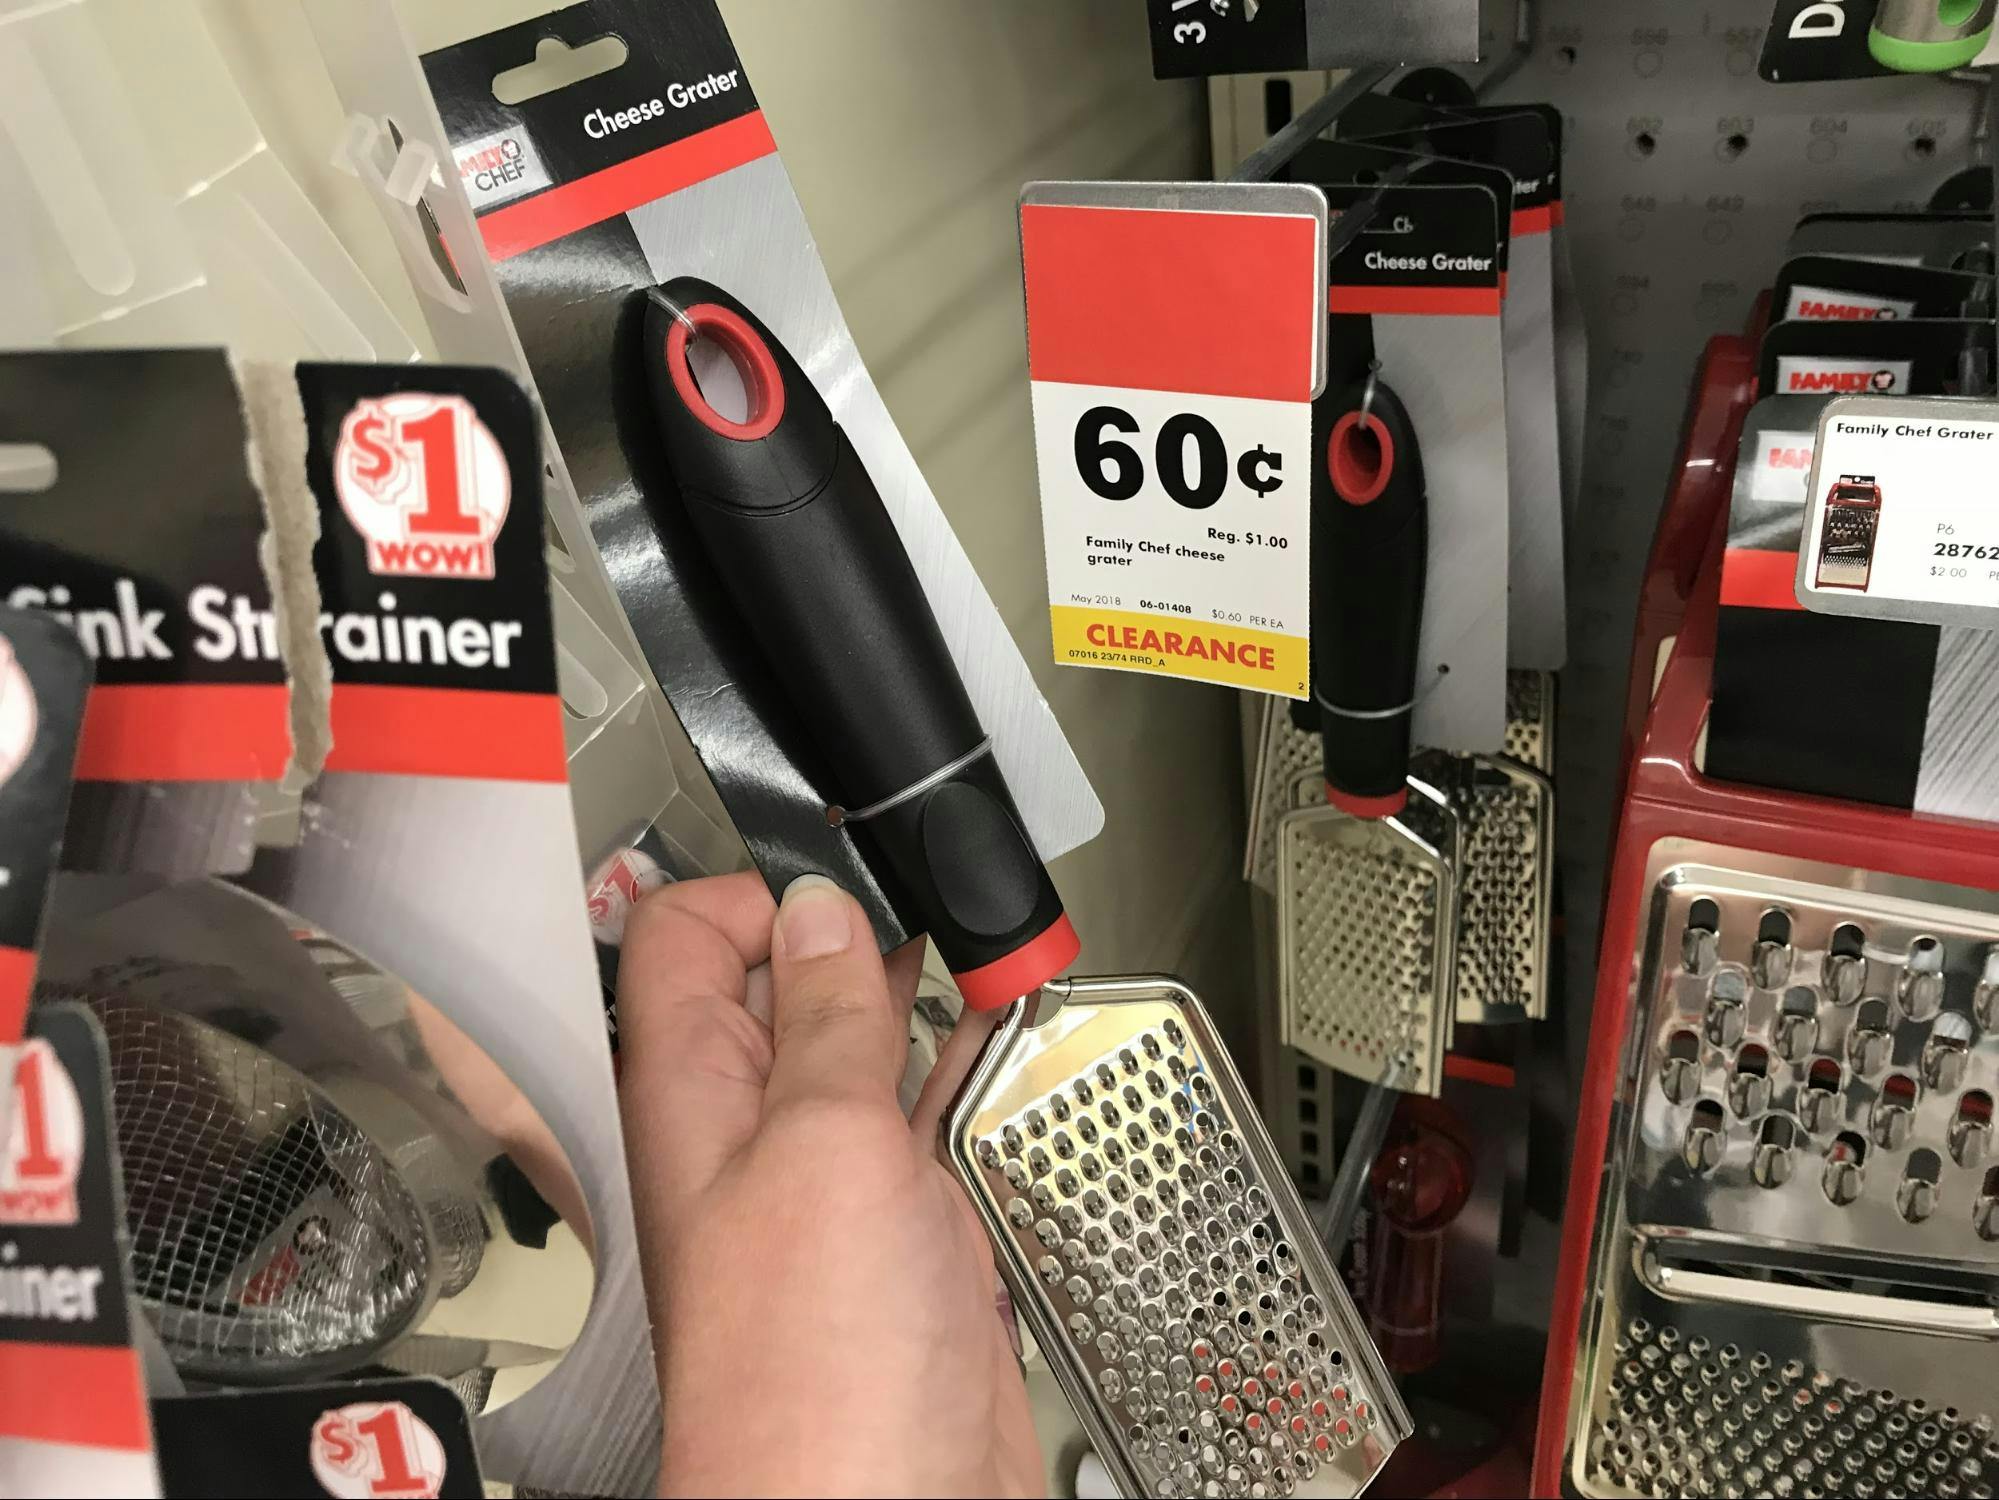 A cheese grater on sale for $0.60